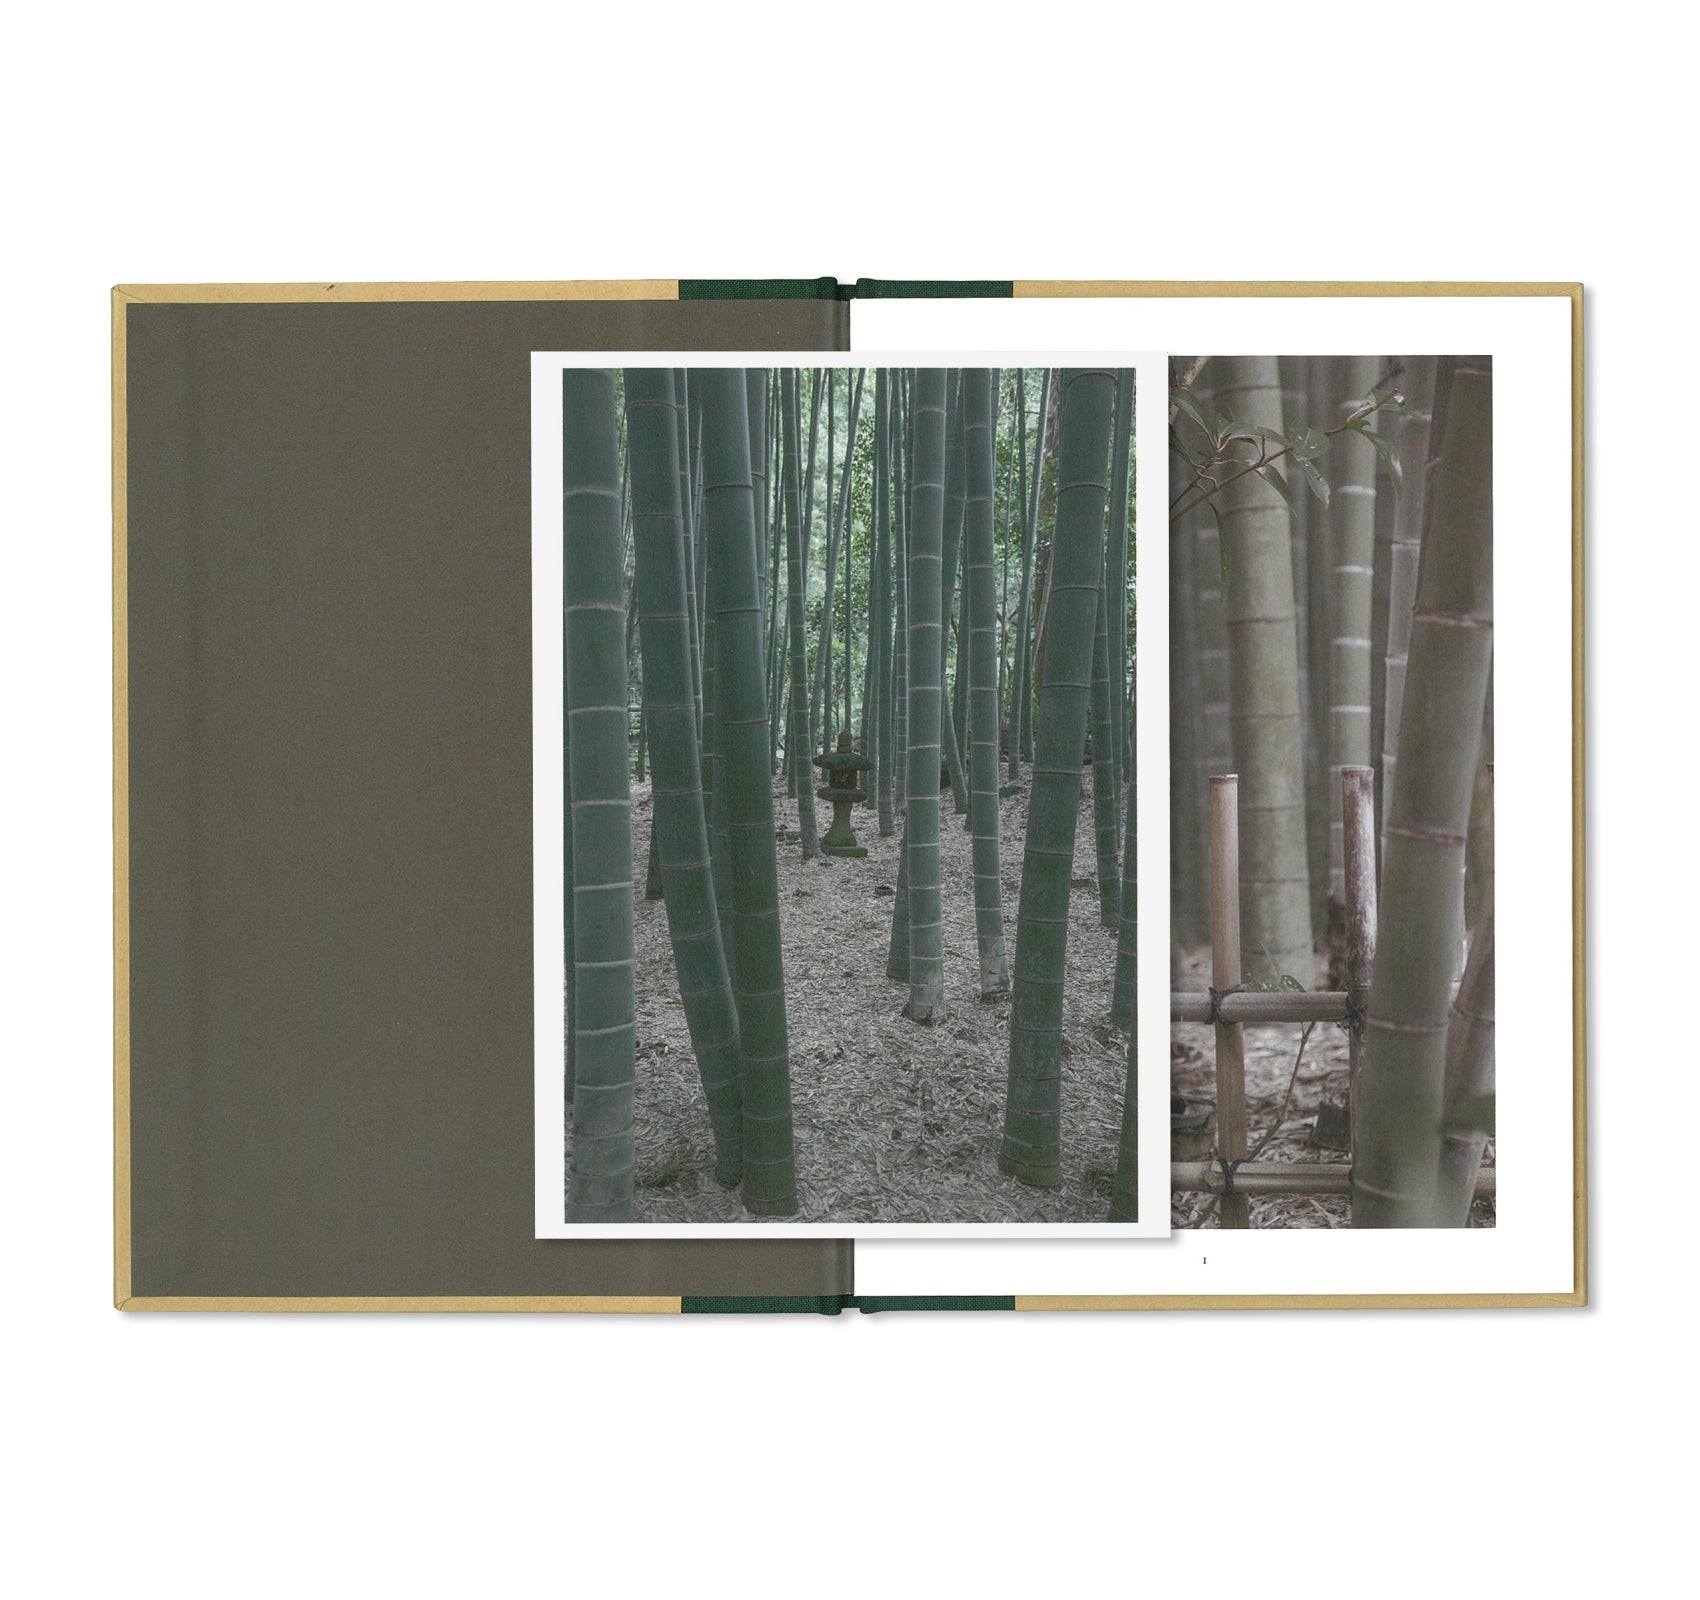 ONE PICTURE BOOK TWO #18: A WALK THROUGH A BAMBOO GROVE by David H. Gibson